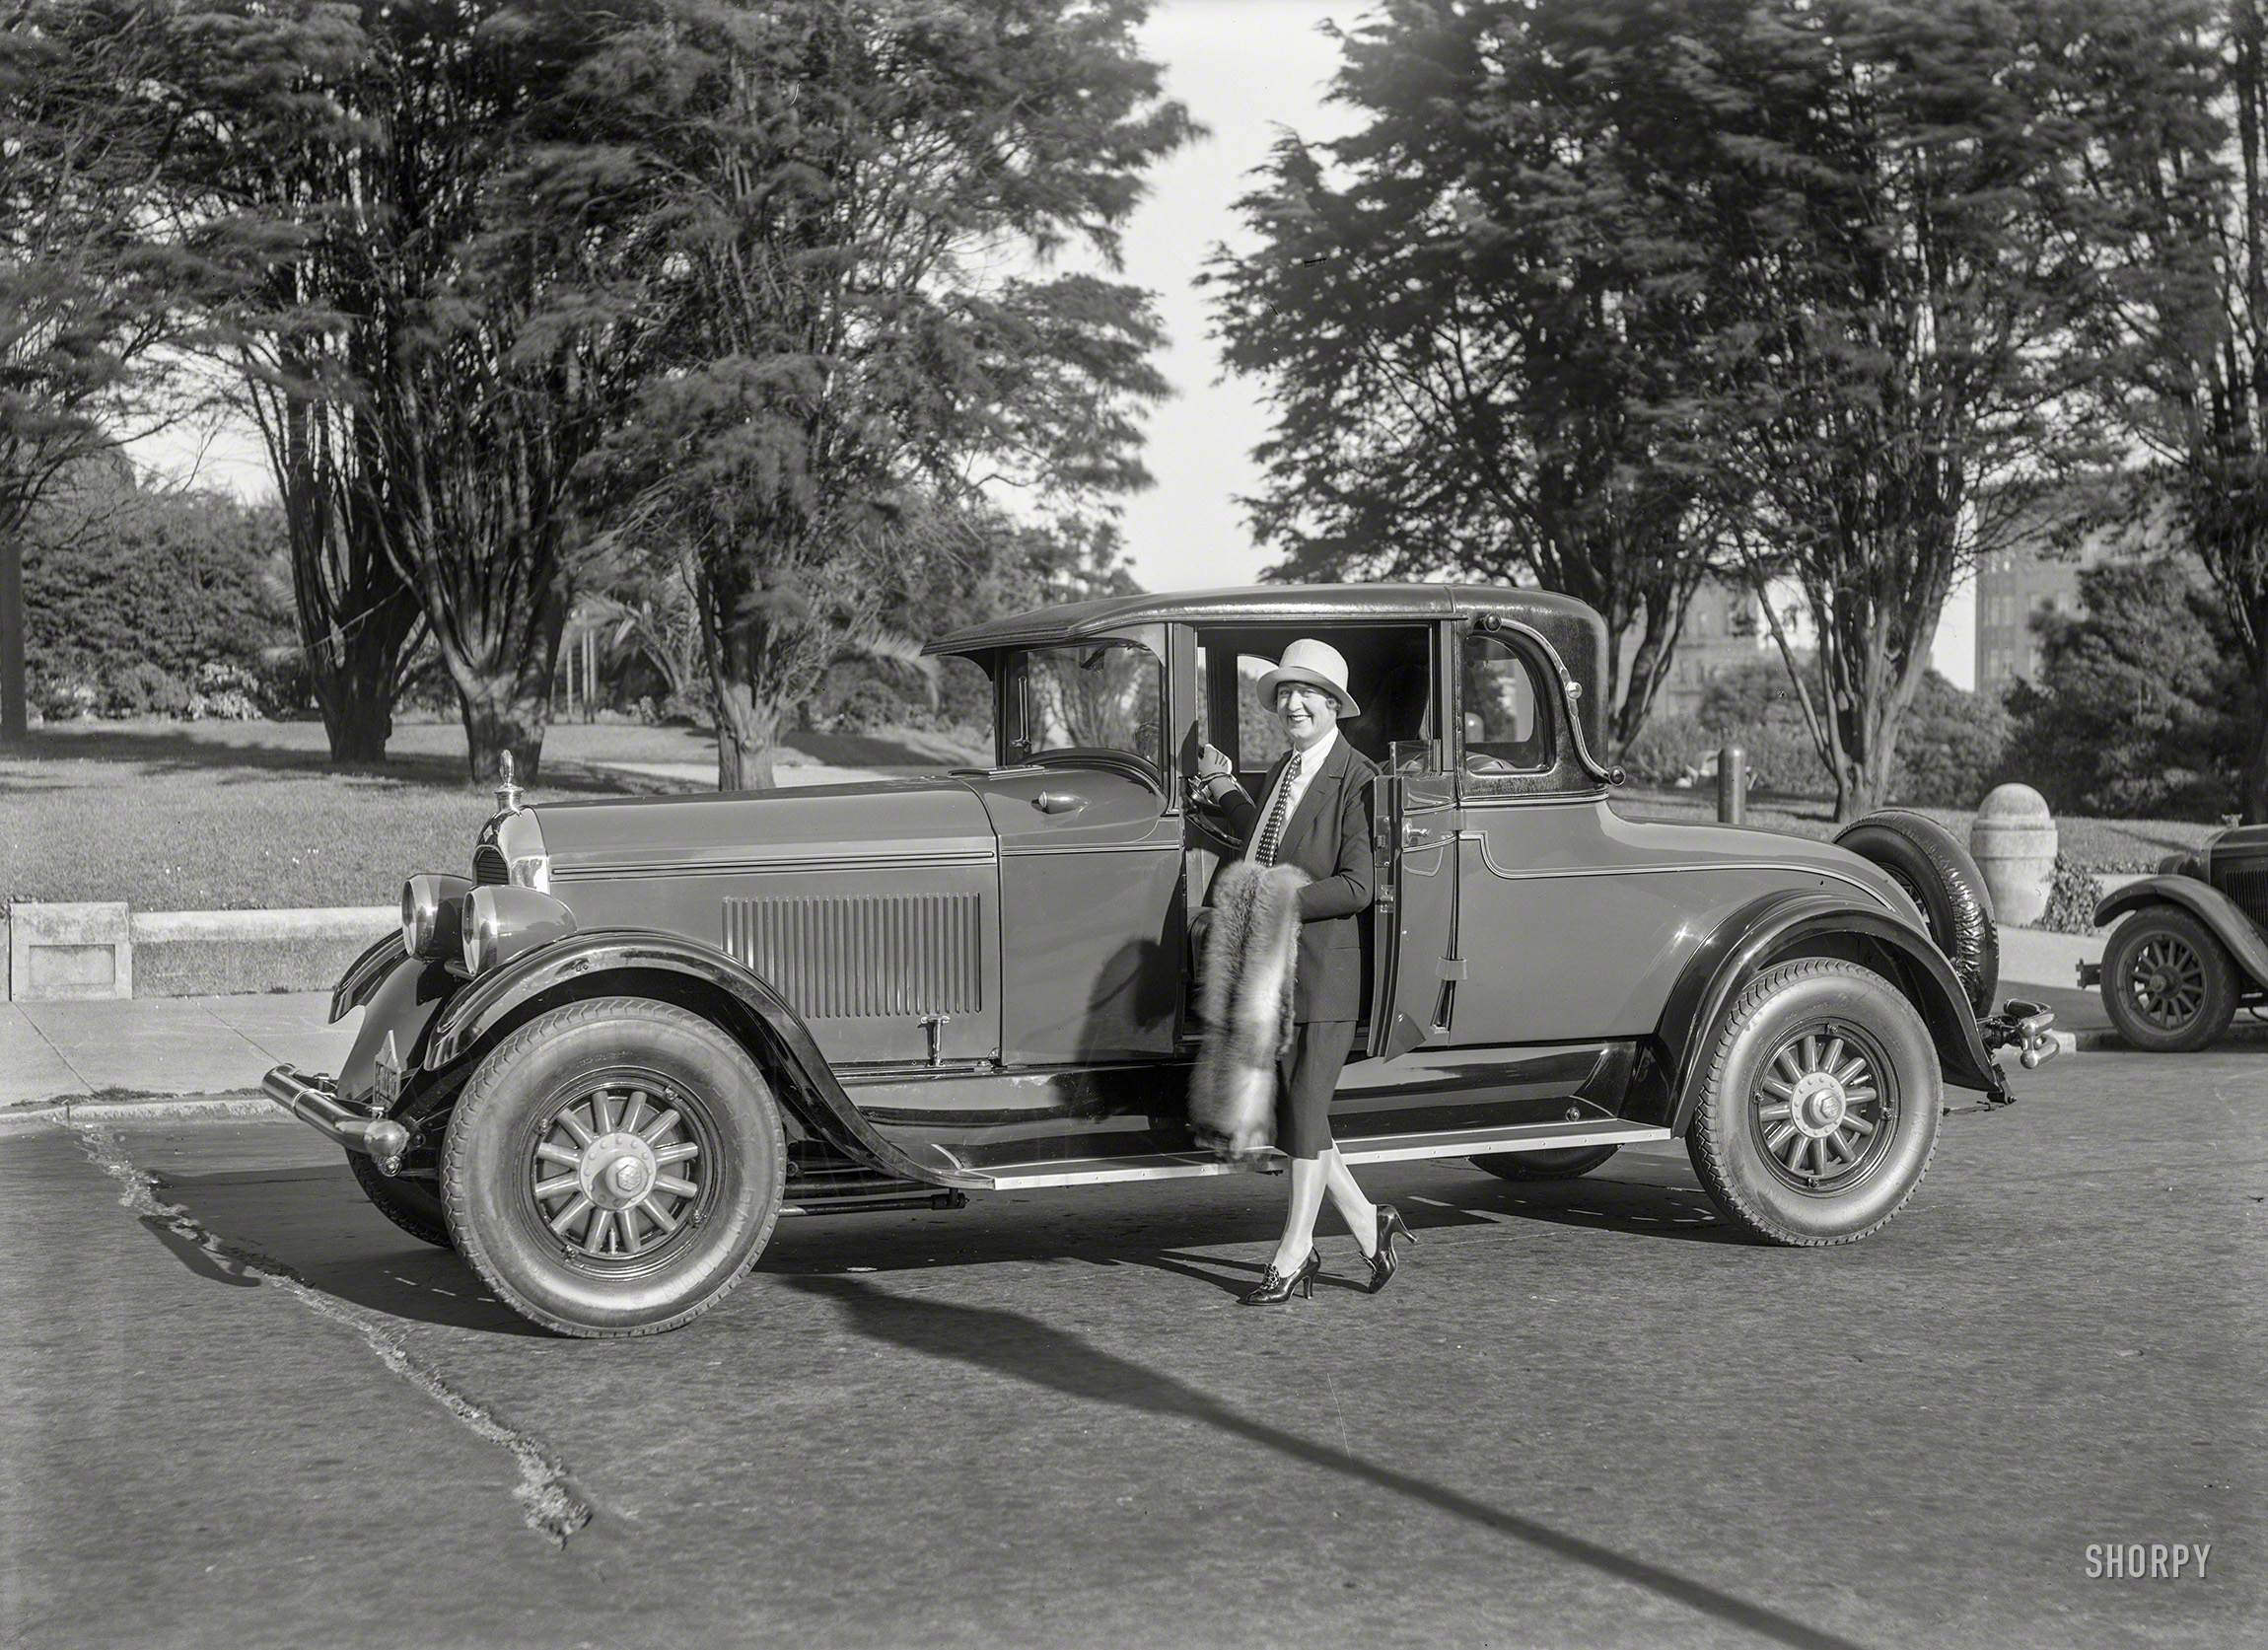 San Francisco circa 1927. "Paige Landau Coupe at Lafayette Park." Latest contestant in the Shorpy Pageant of Automotive Obscurities. 5x7 glass negative by Chris Helin. View full size.